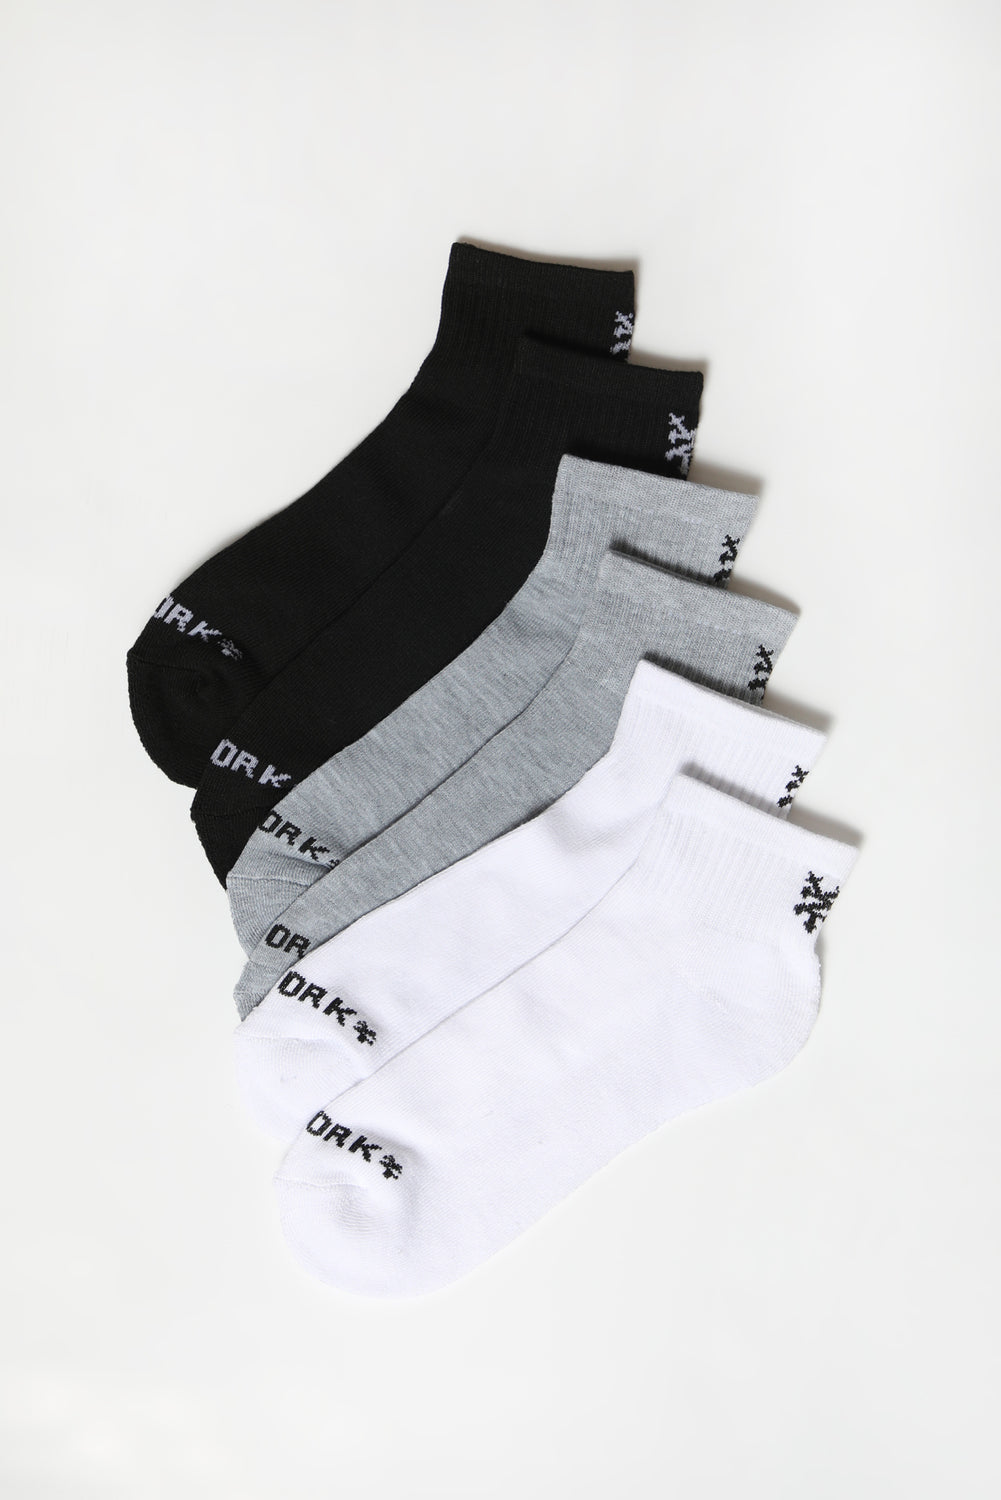 Zoo York Youth Athletic Ankle Socks 6-Pack Black with White